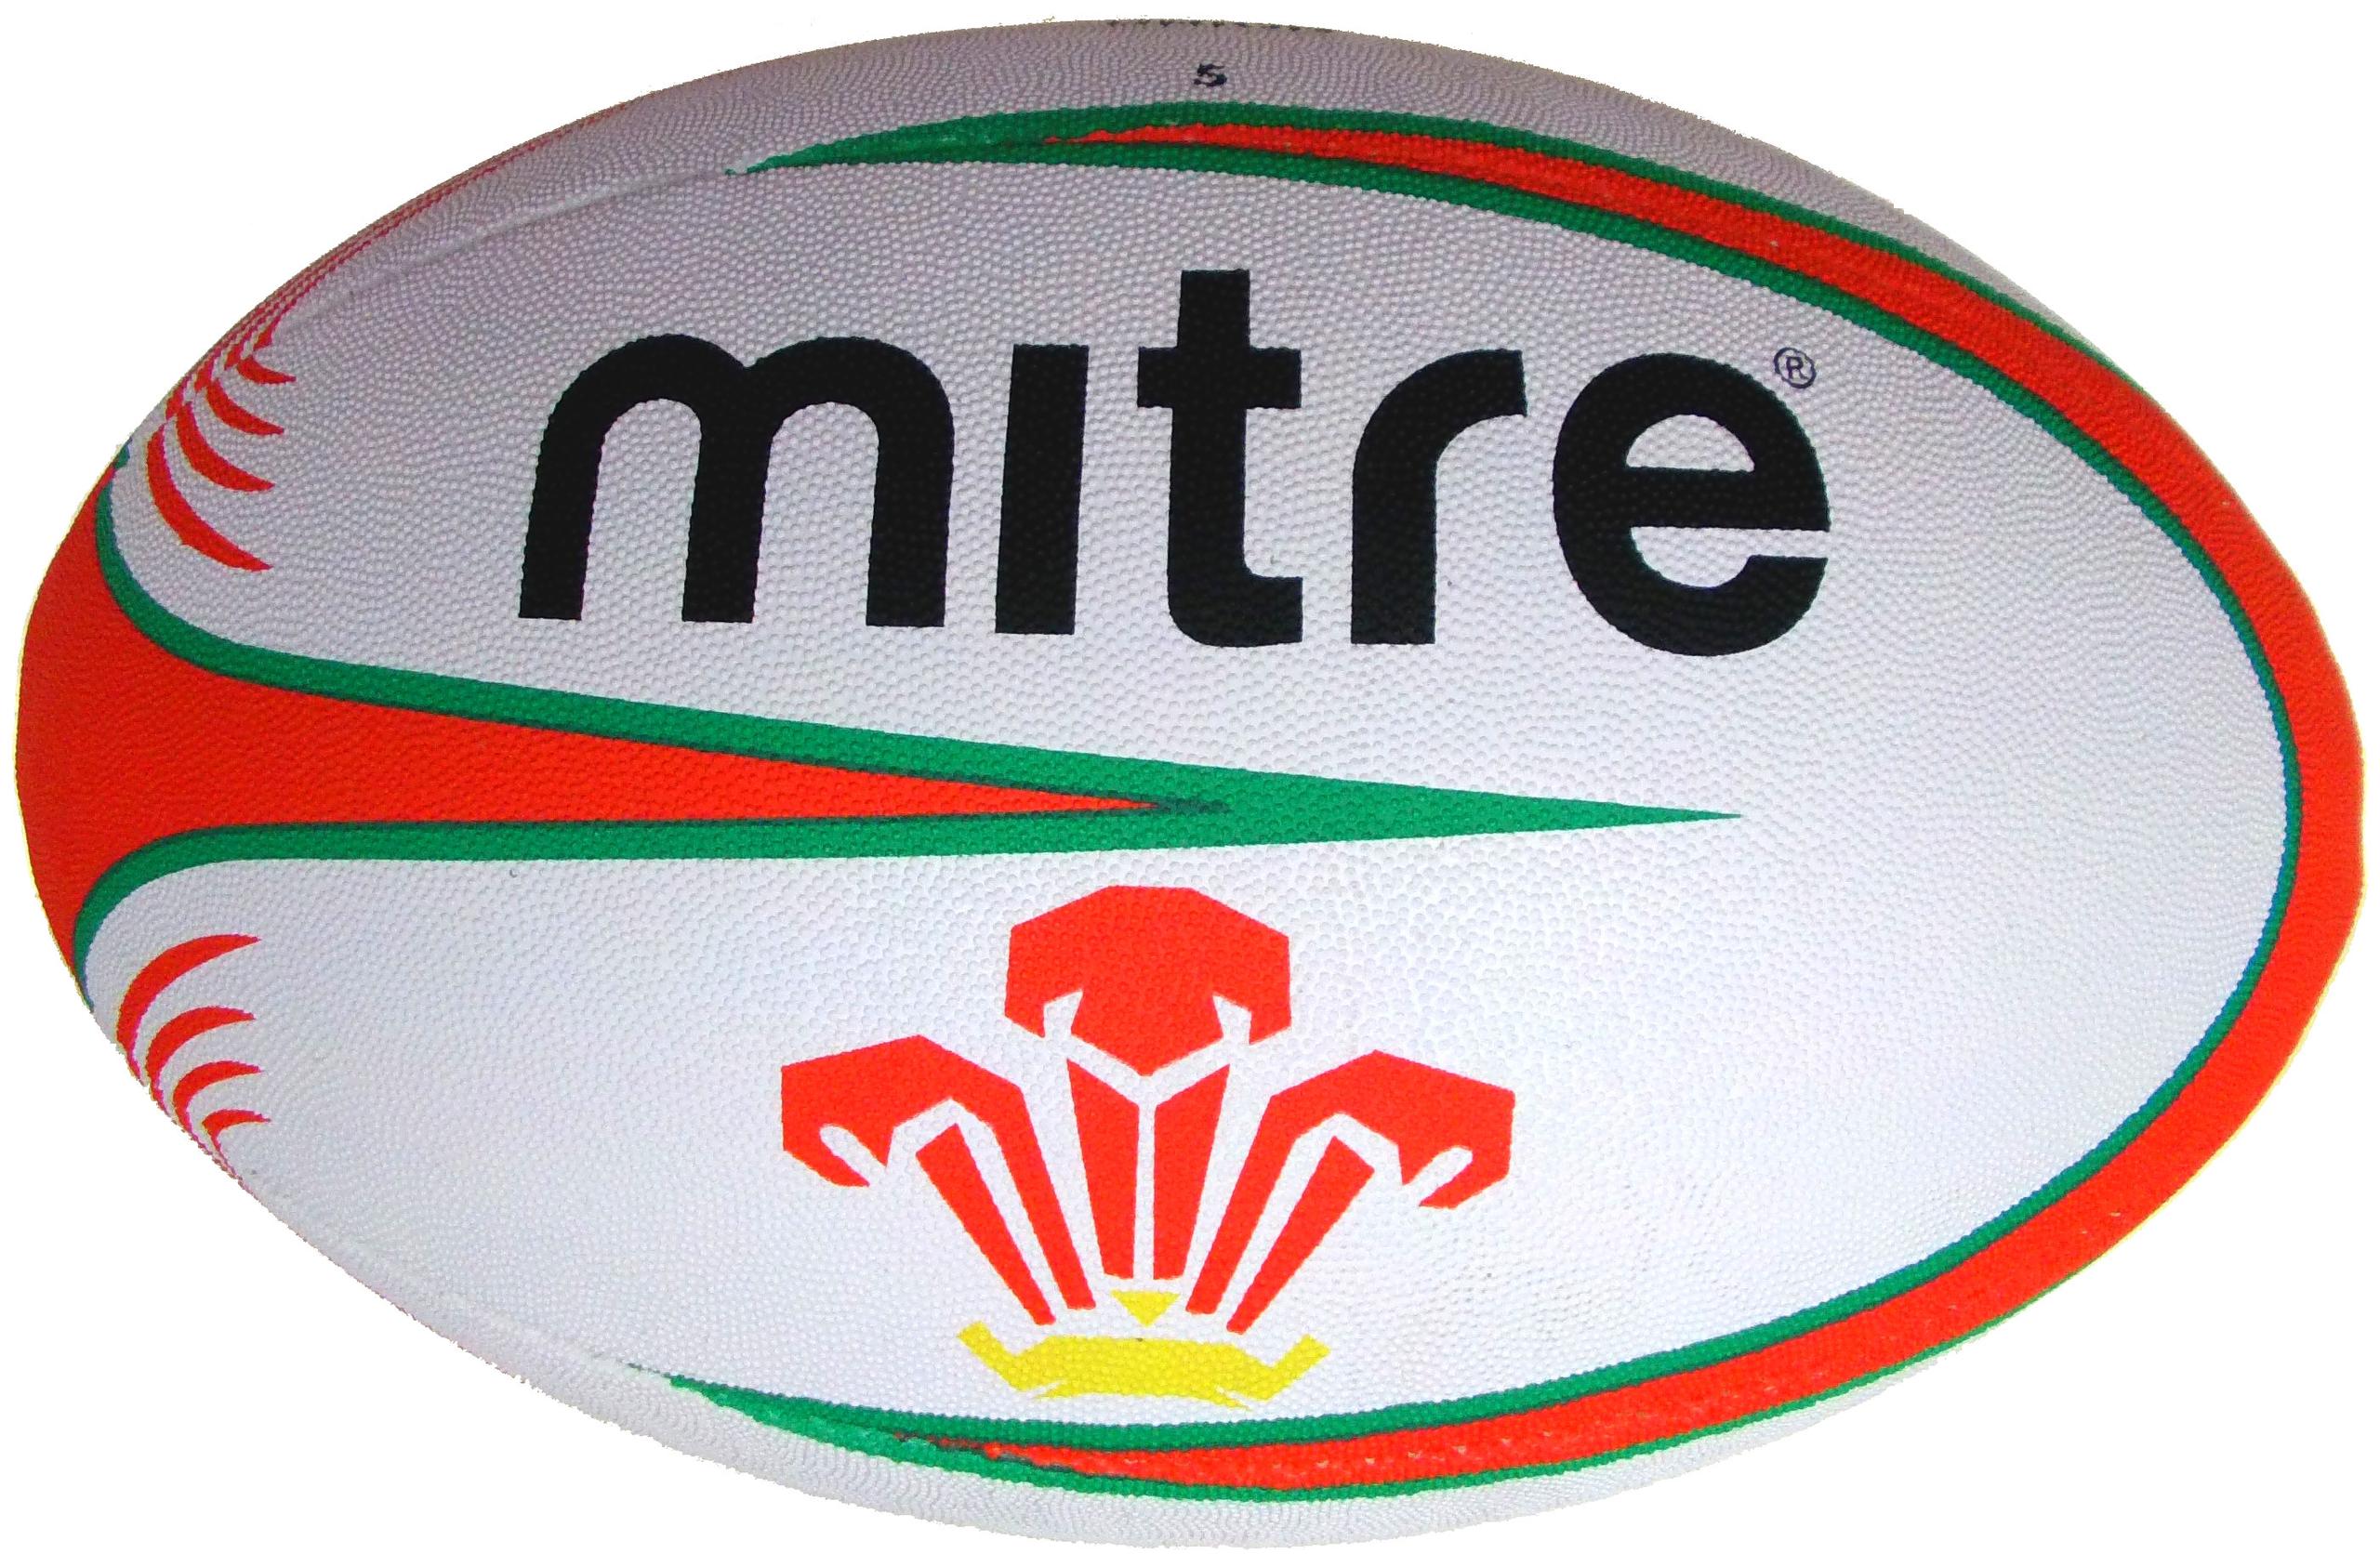 Mitre Wales Rugby Ball size 5